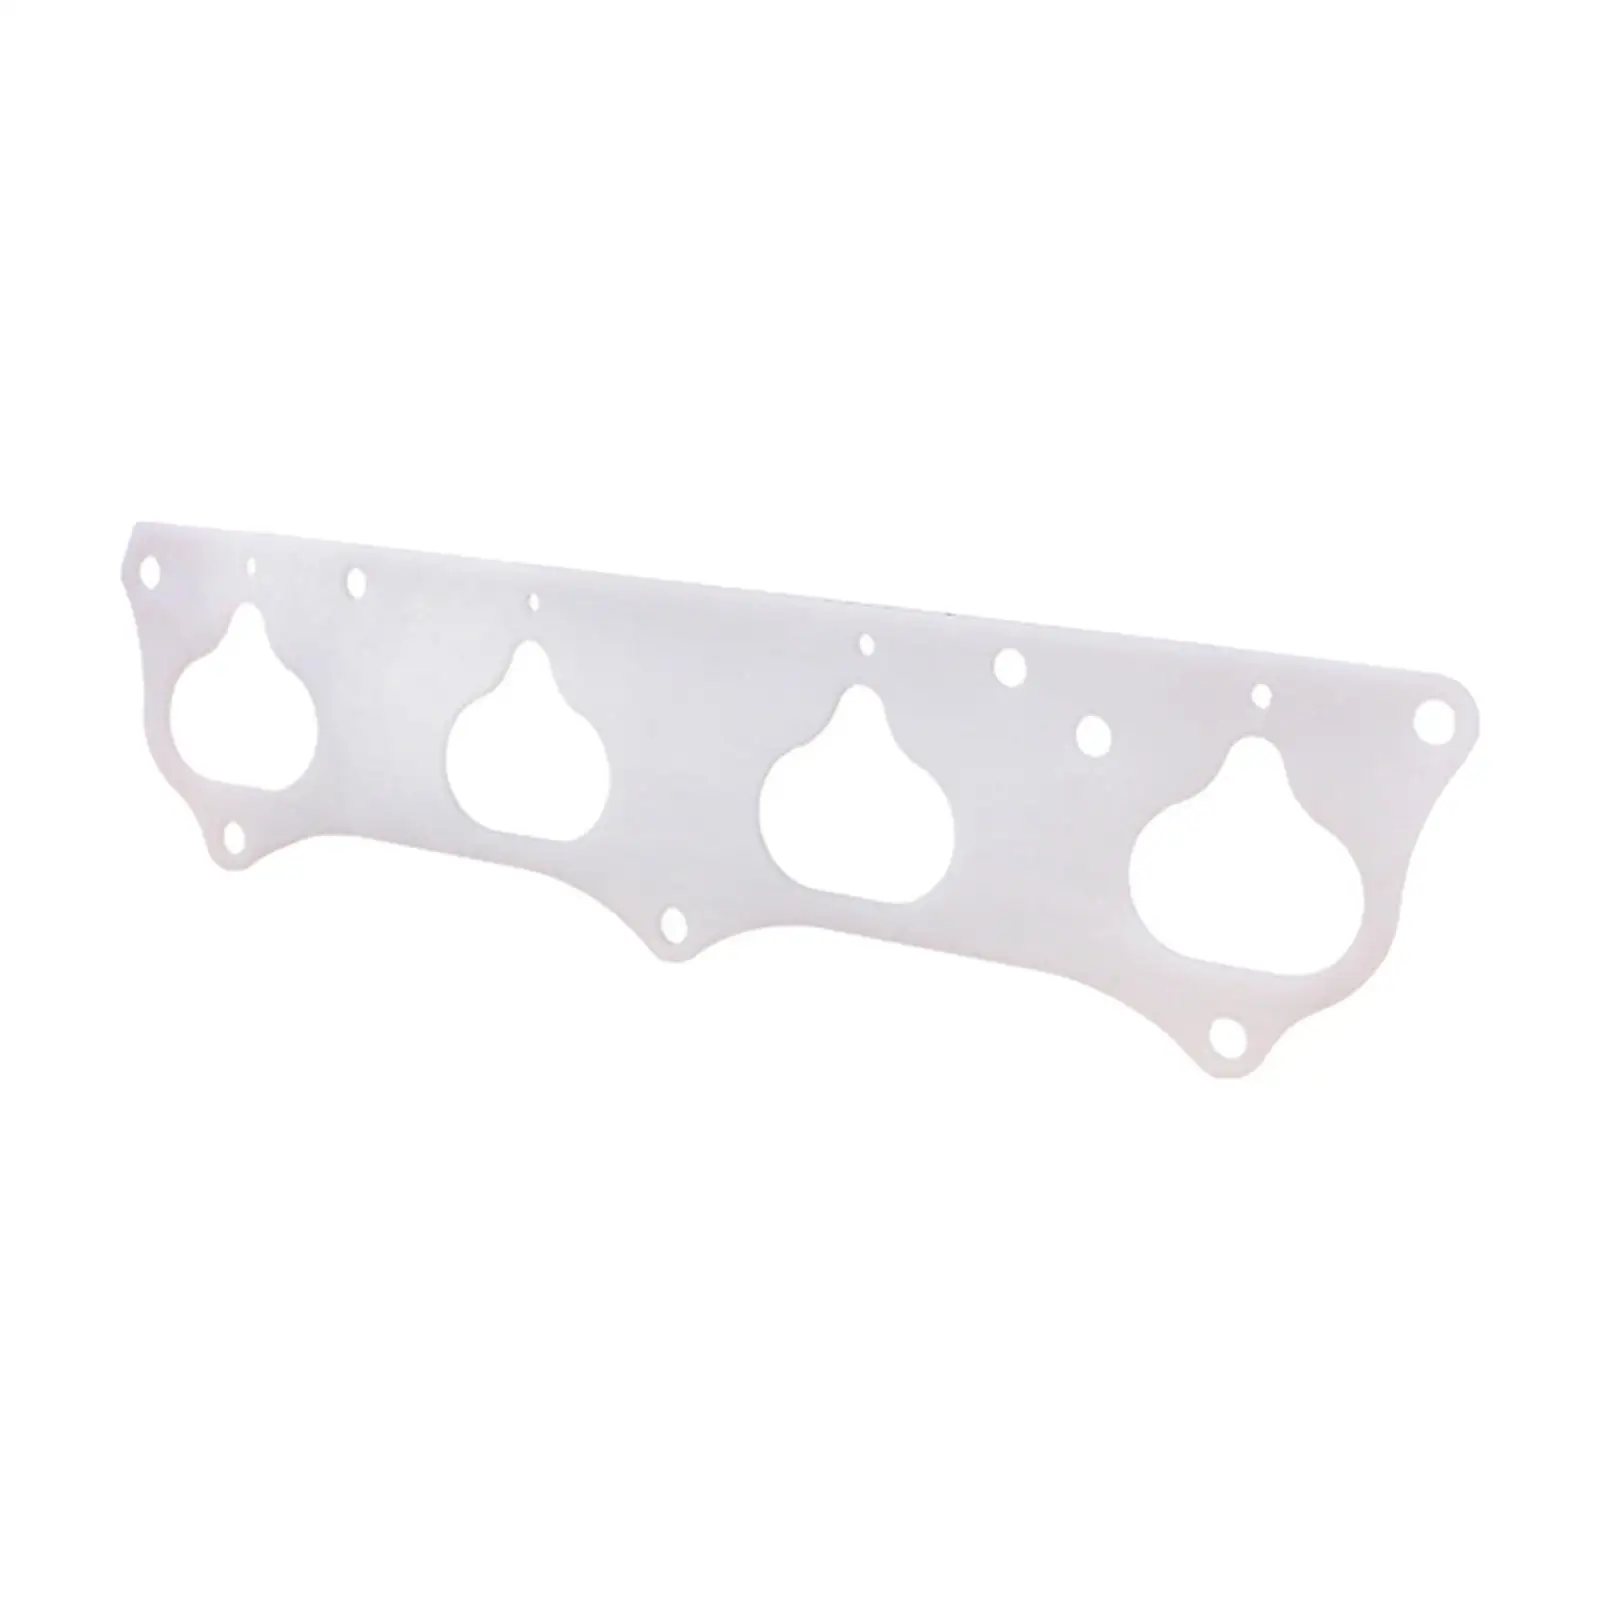 Car Thermal Intake Manifold Gasket High Performance Accessories Spare Parts